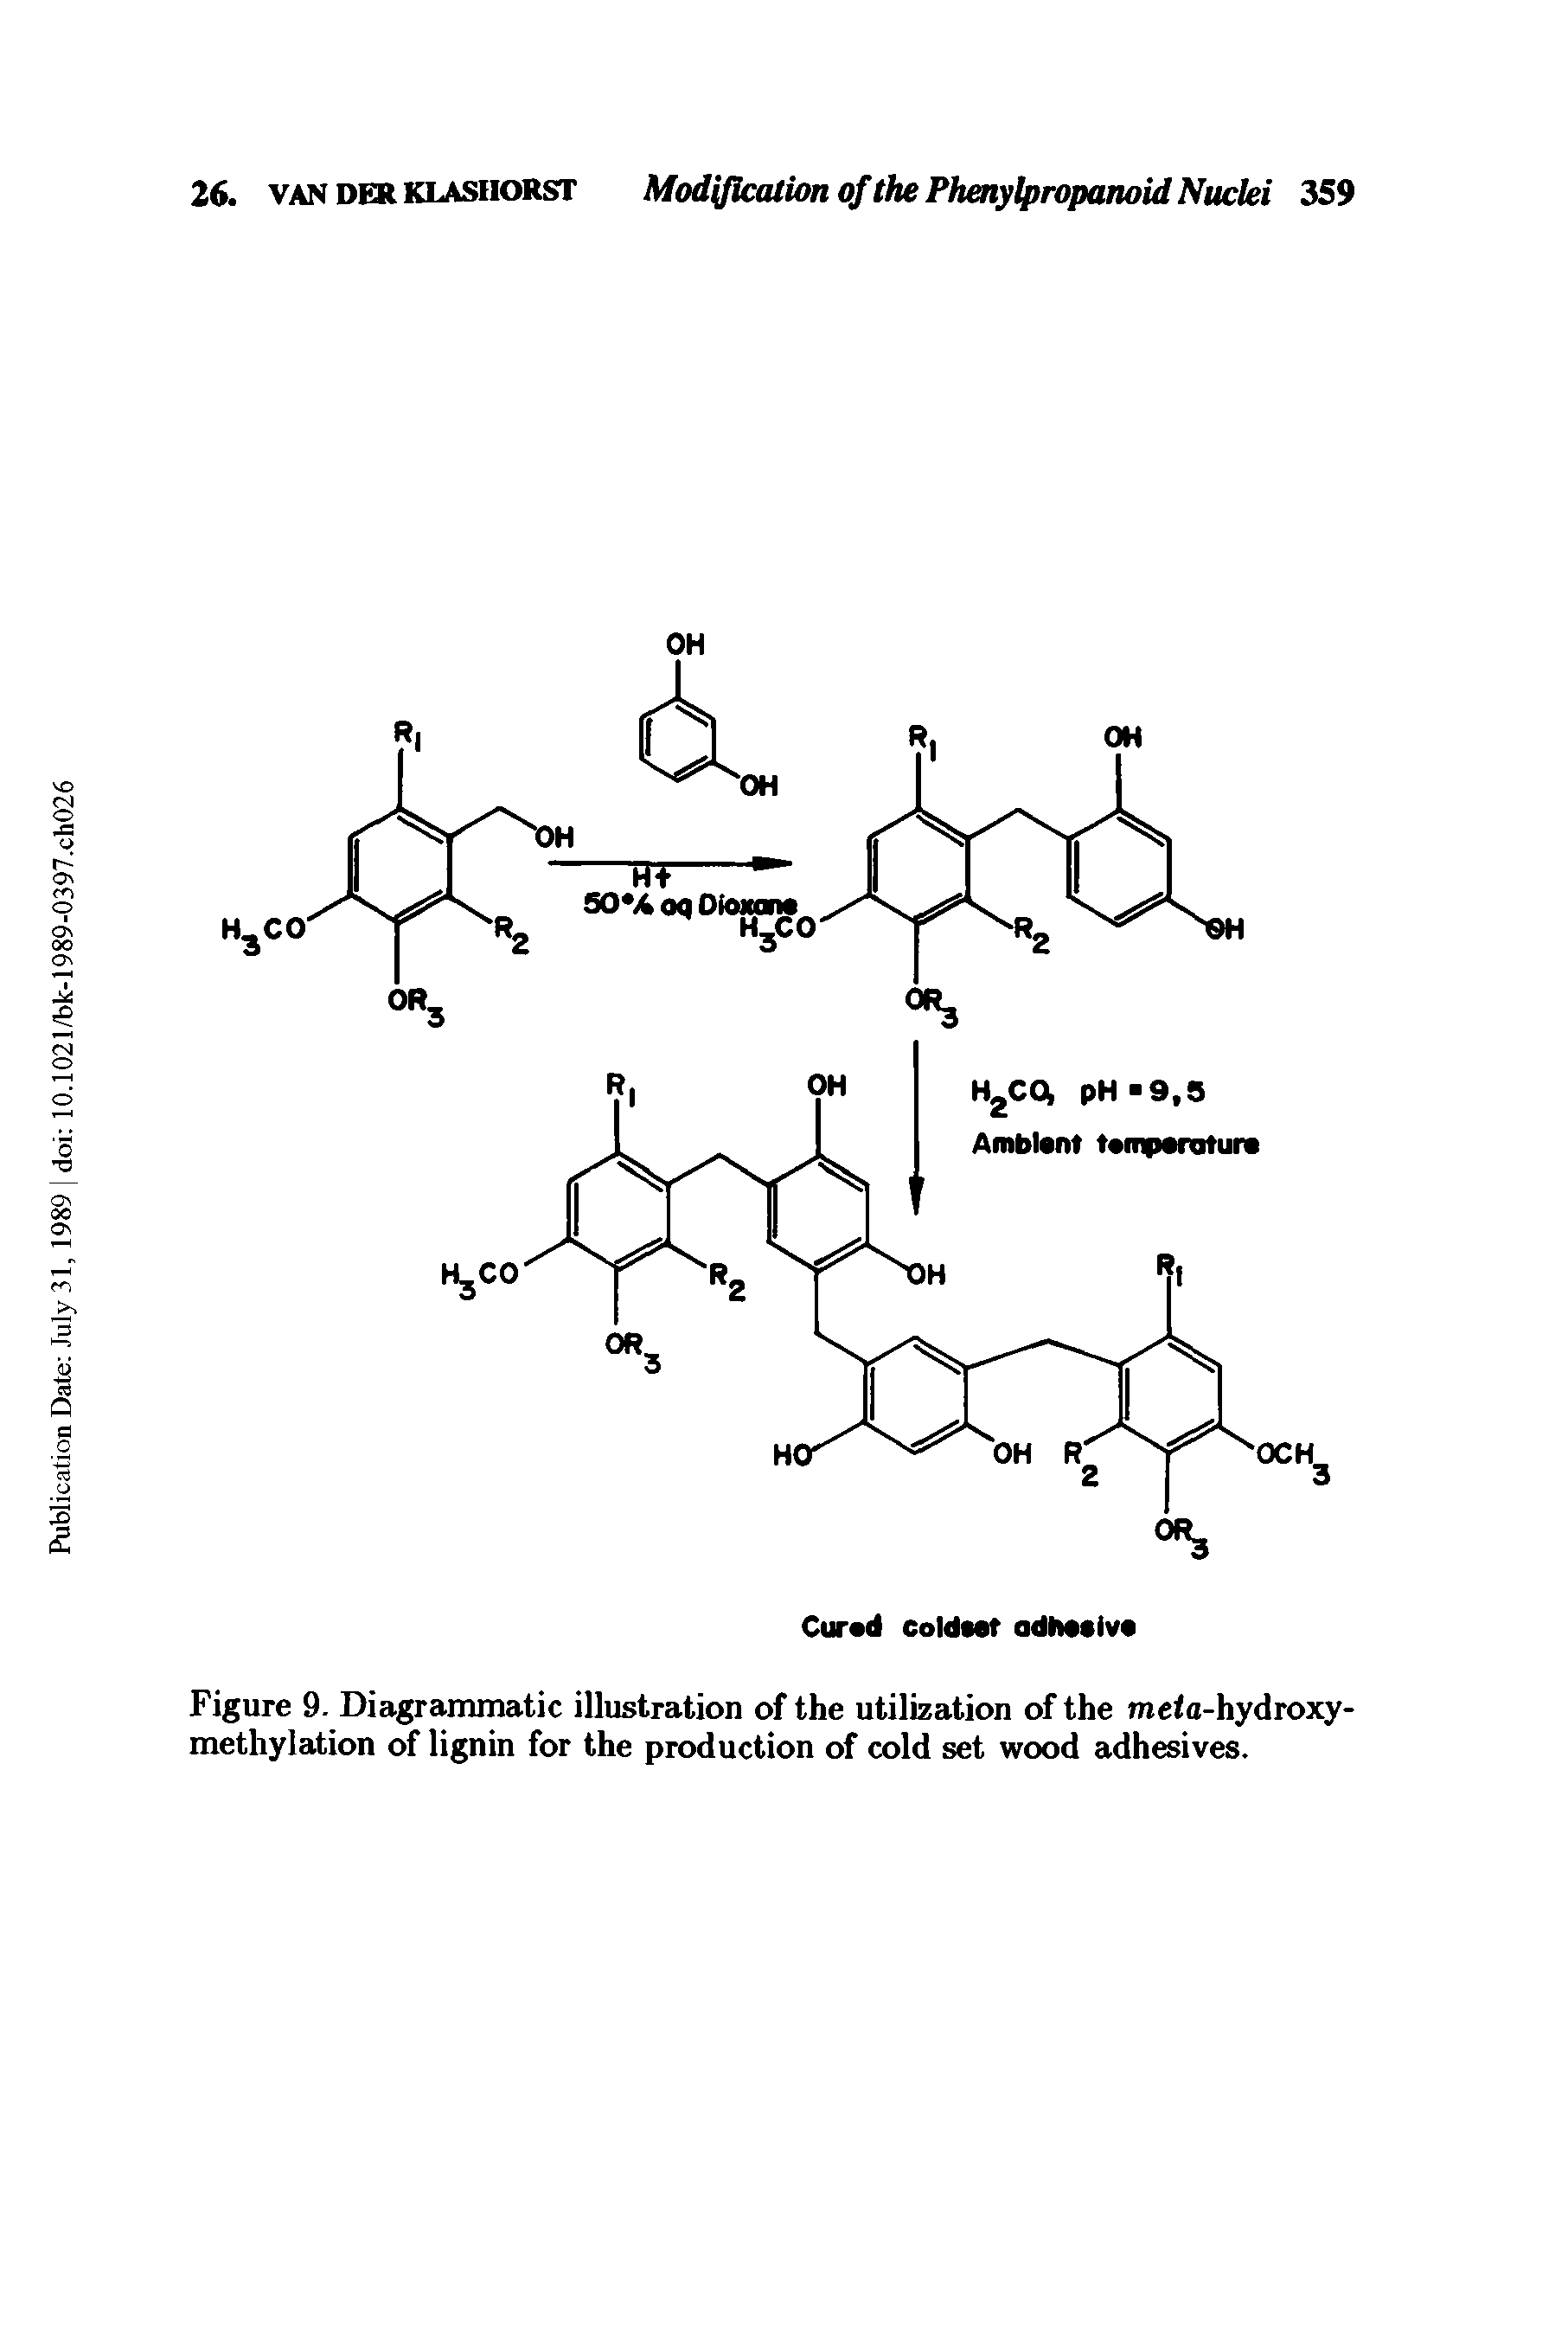 Figure 9. Diagrammatic illustration of the utilization of the meta-hydroxy-methylation of lignin for the production of cold set wood adhesives.